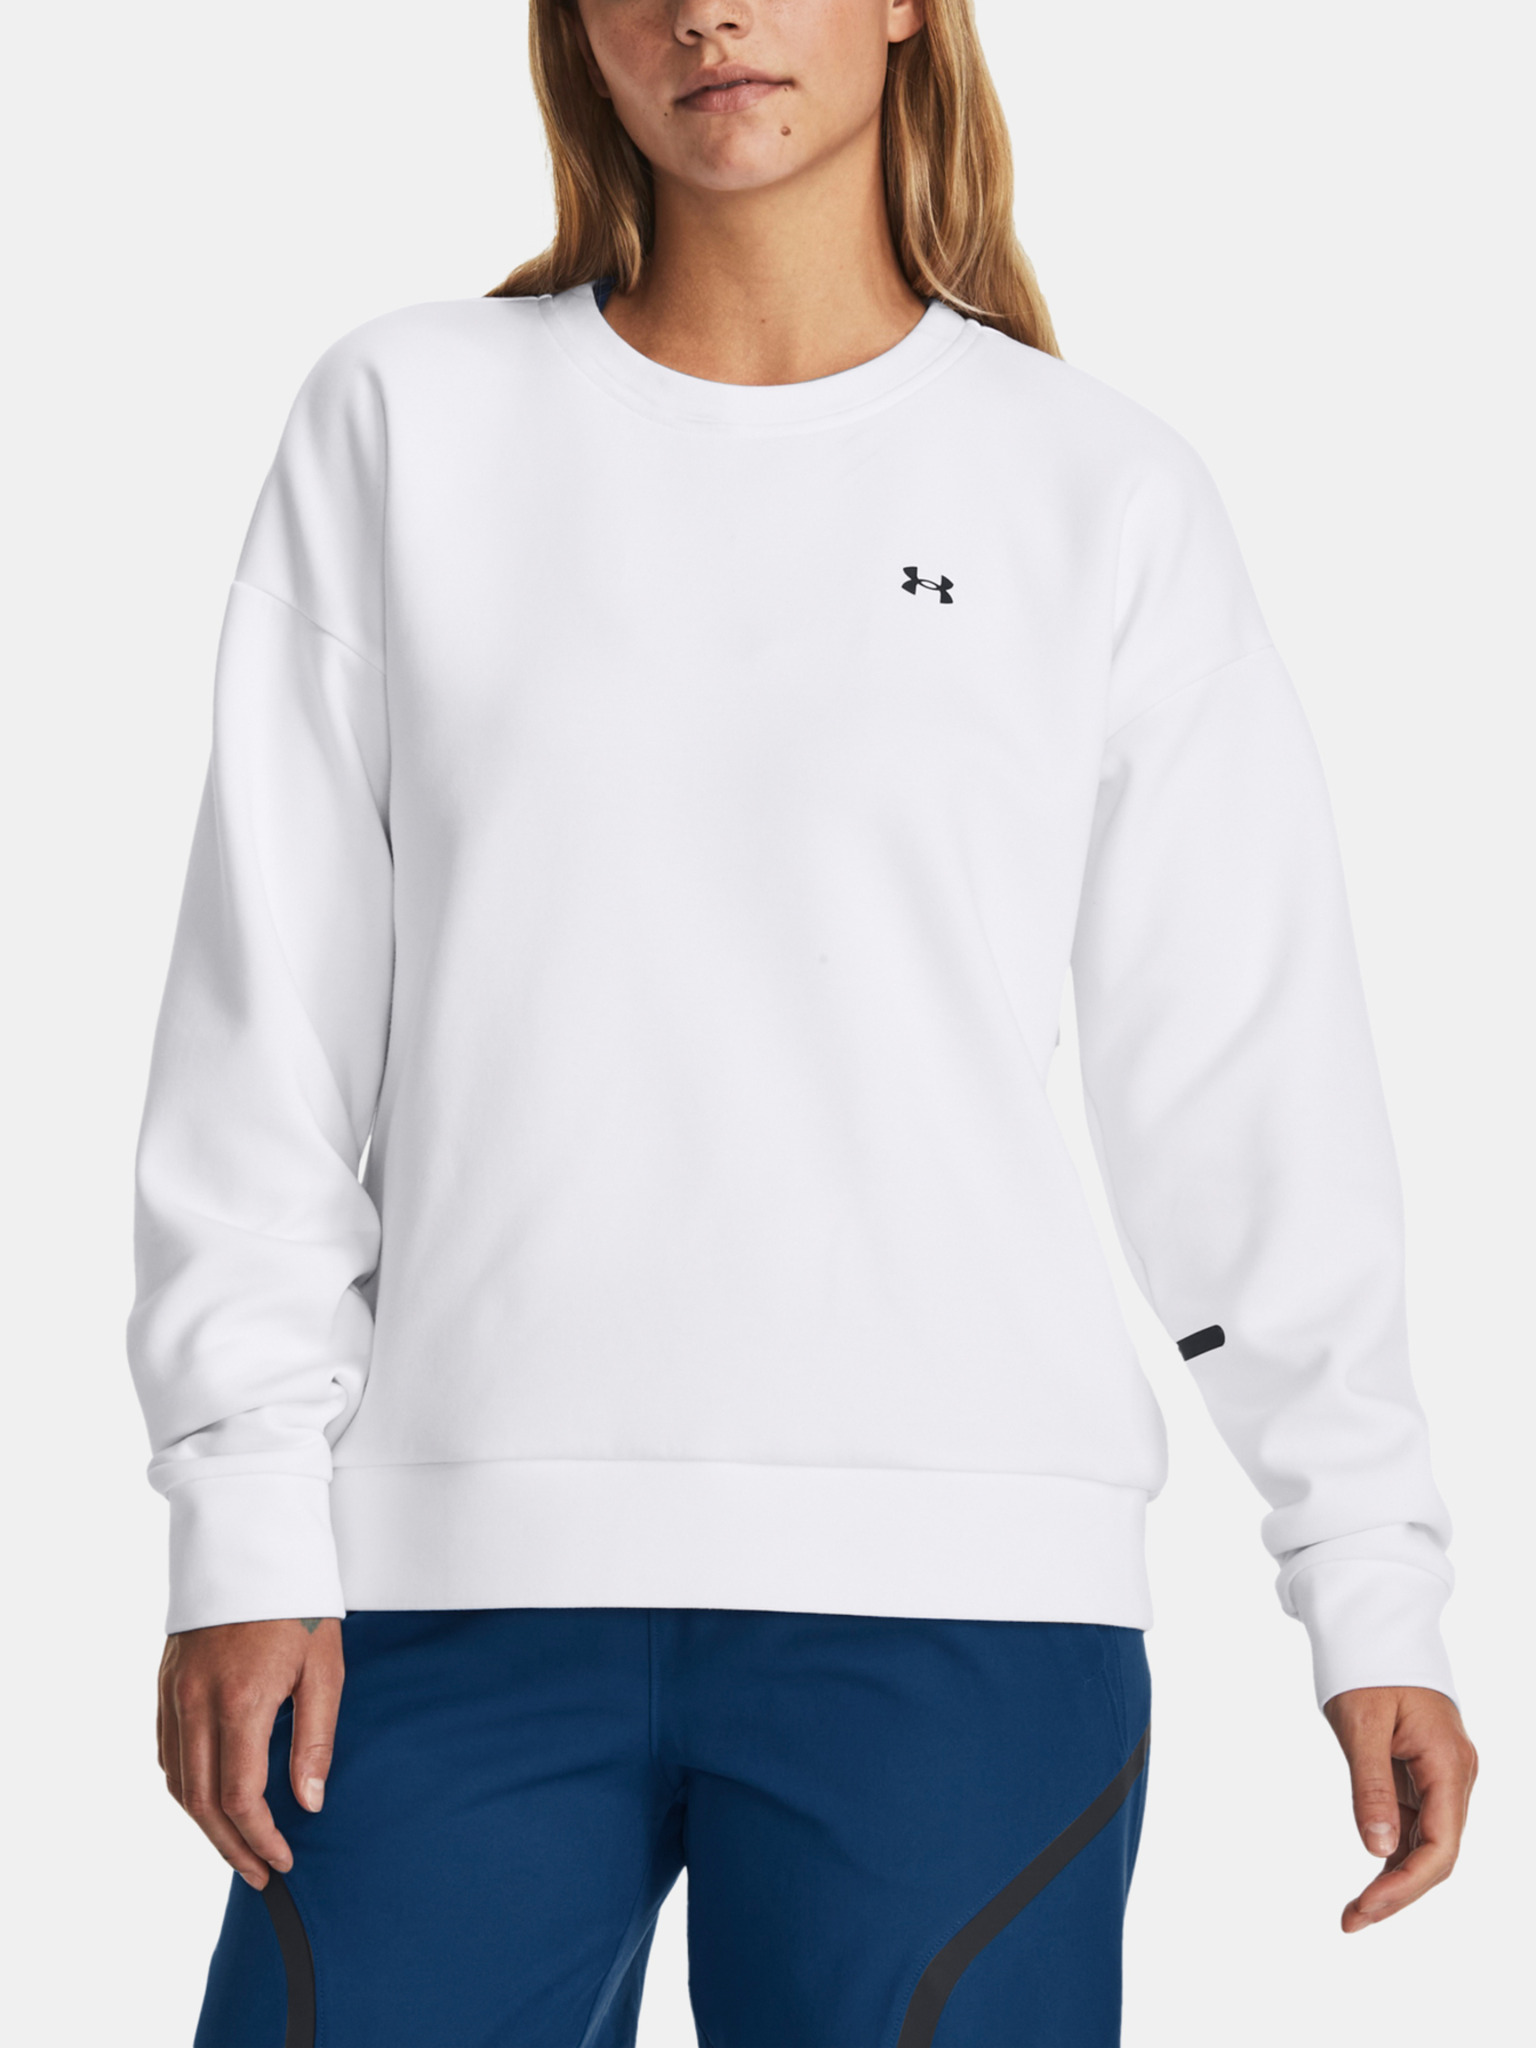 Unstoppable Flc Crew Mikina Under Armour